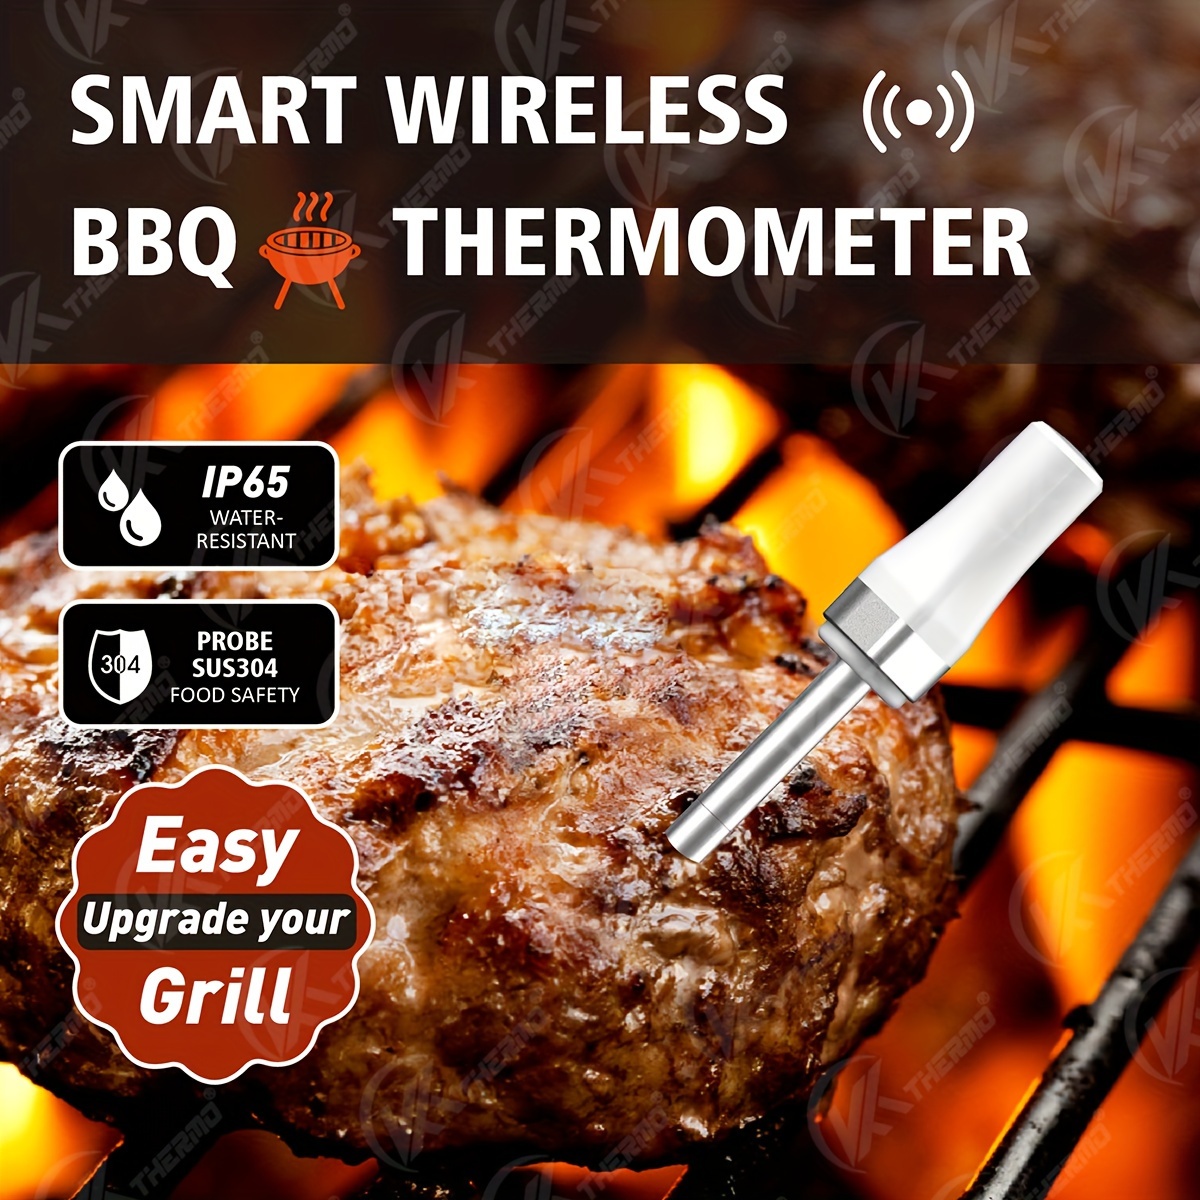 Digital Meat Thermometer with Probe for Oven / Grill / Barbecue